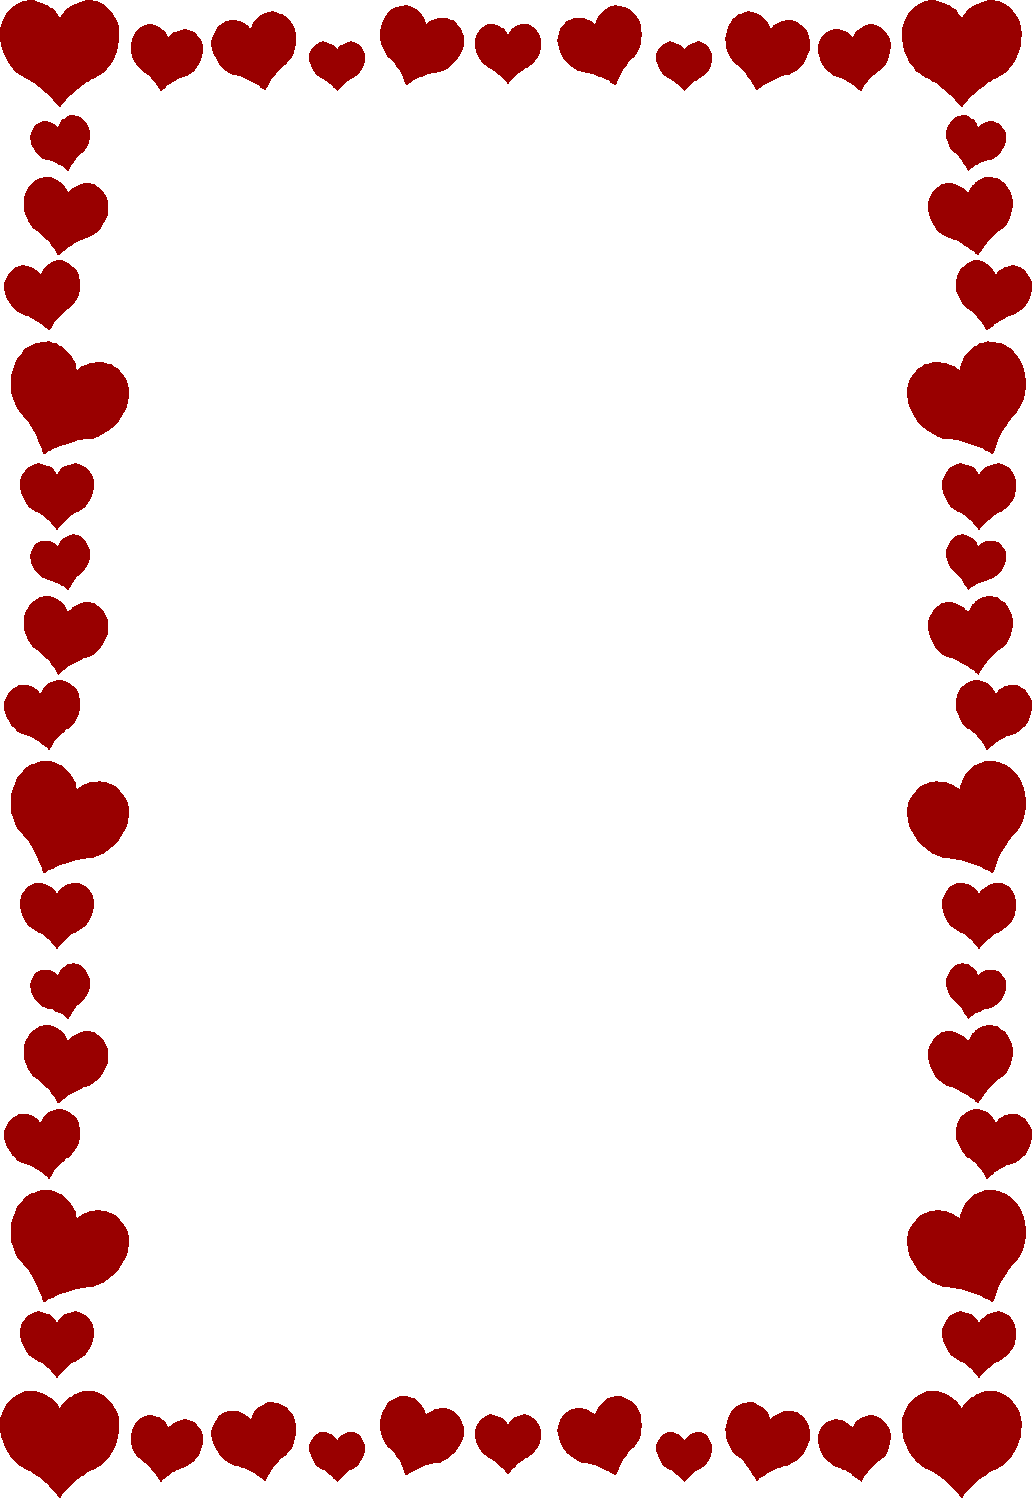 Heart Border For Word Cliparts co